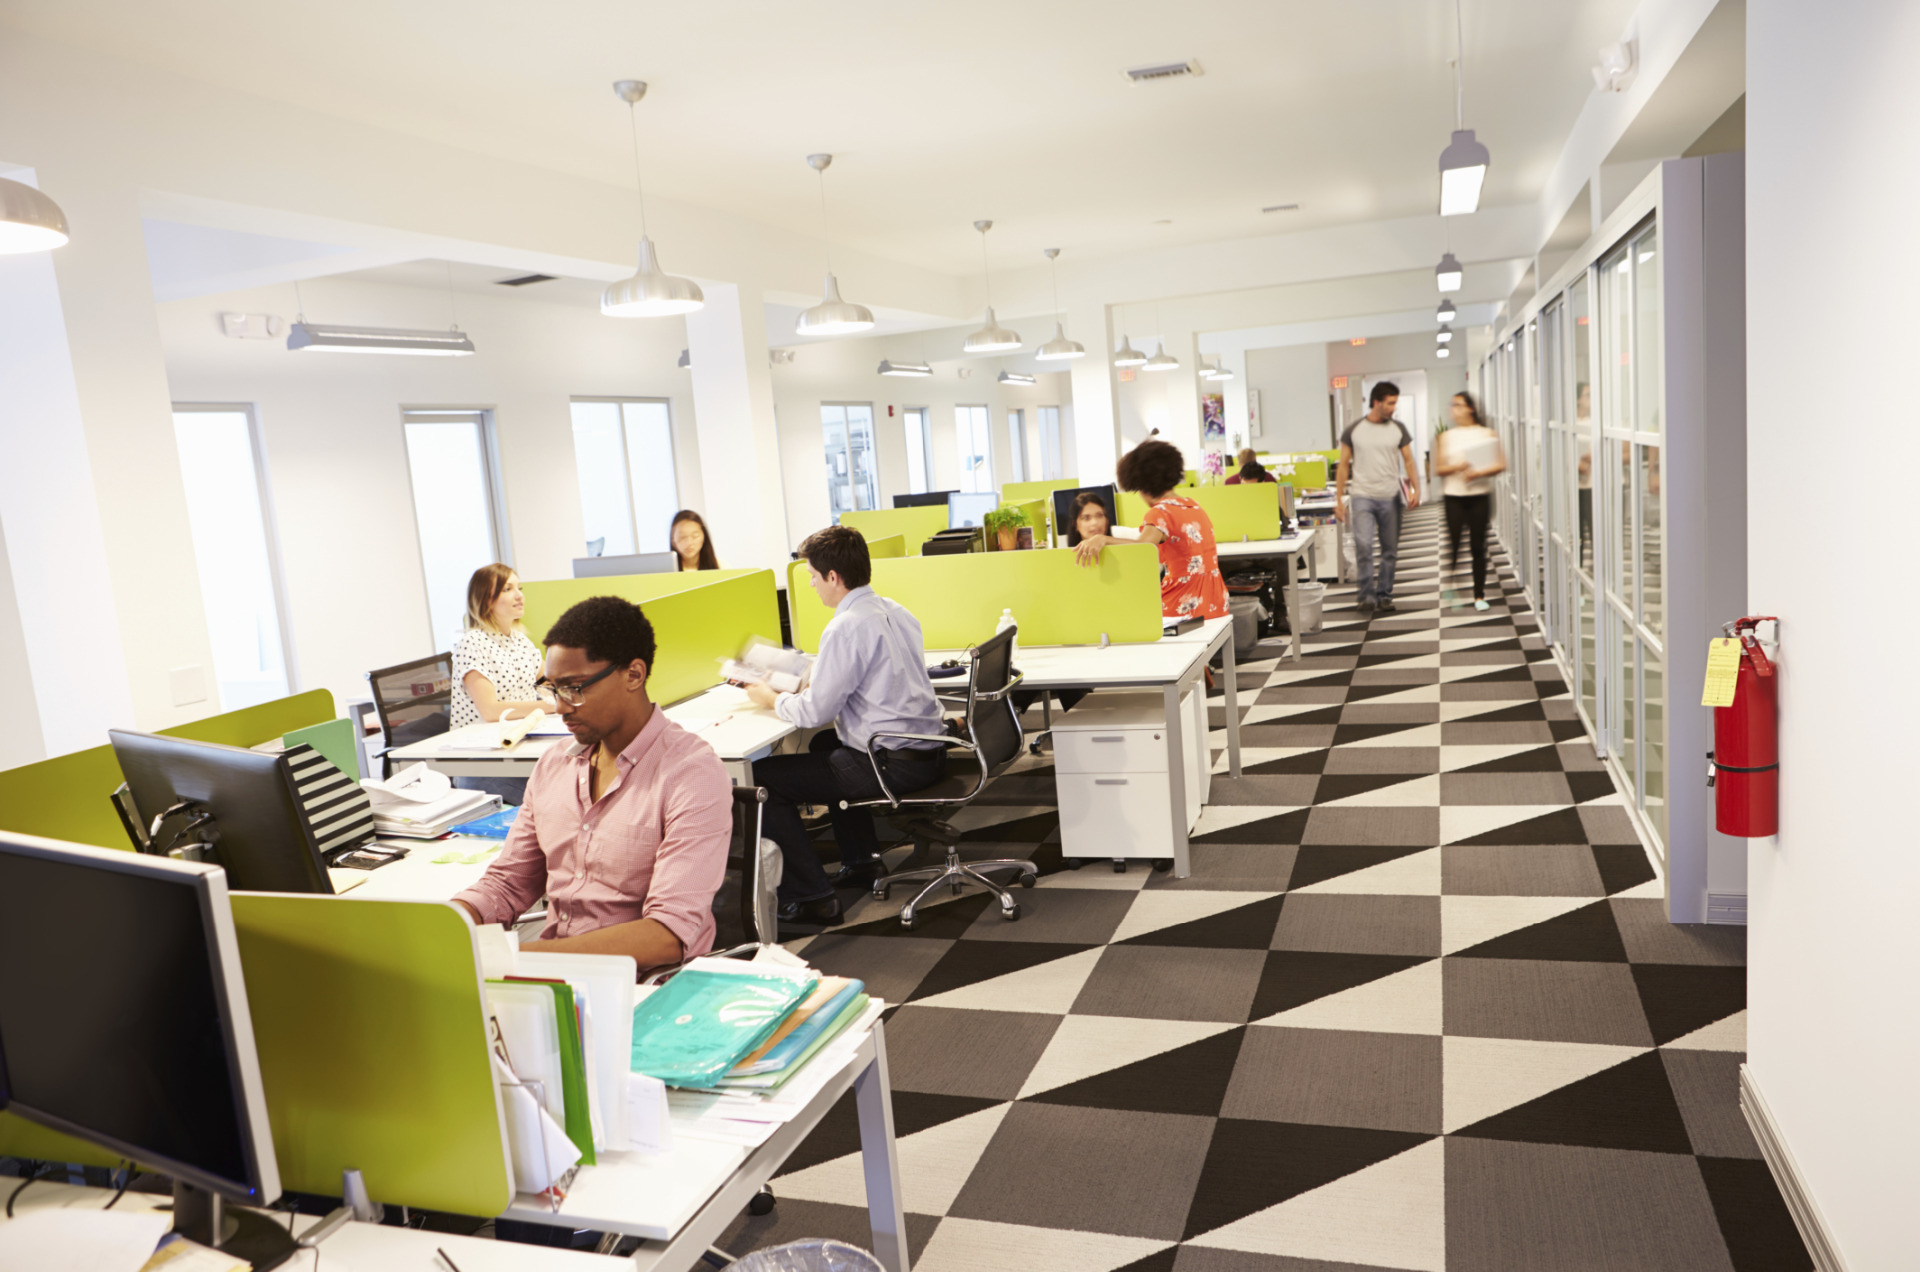 We design office interiors and manage office fit outs at Stamford Interiors